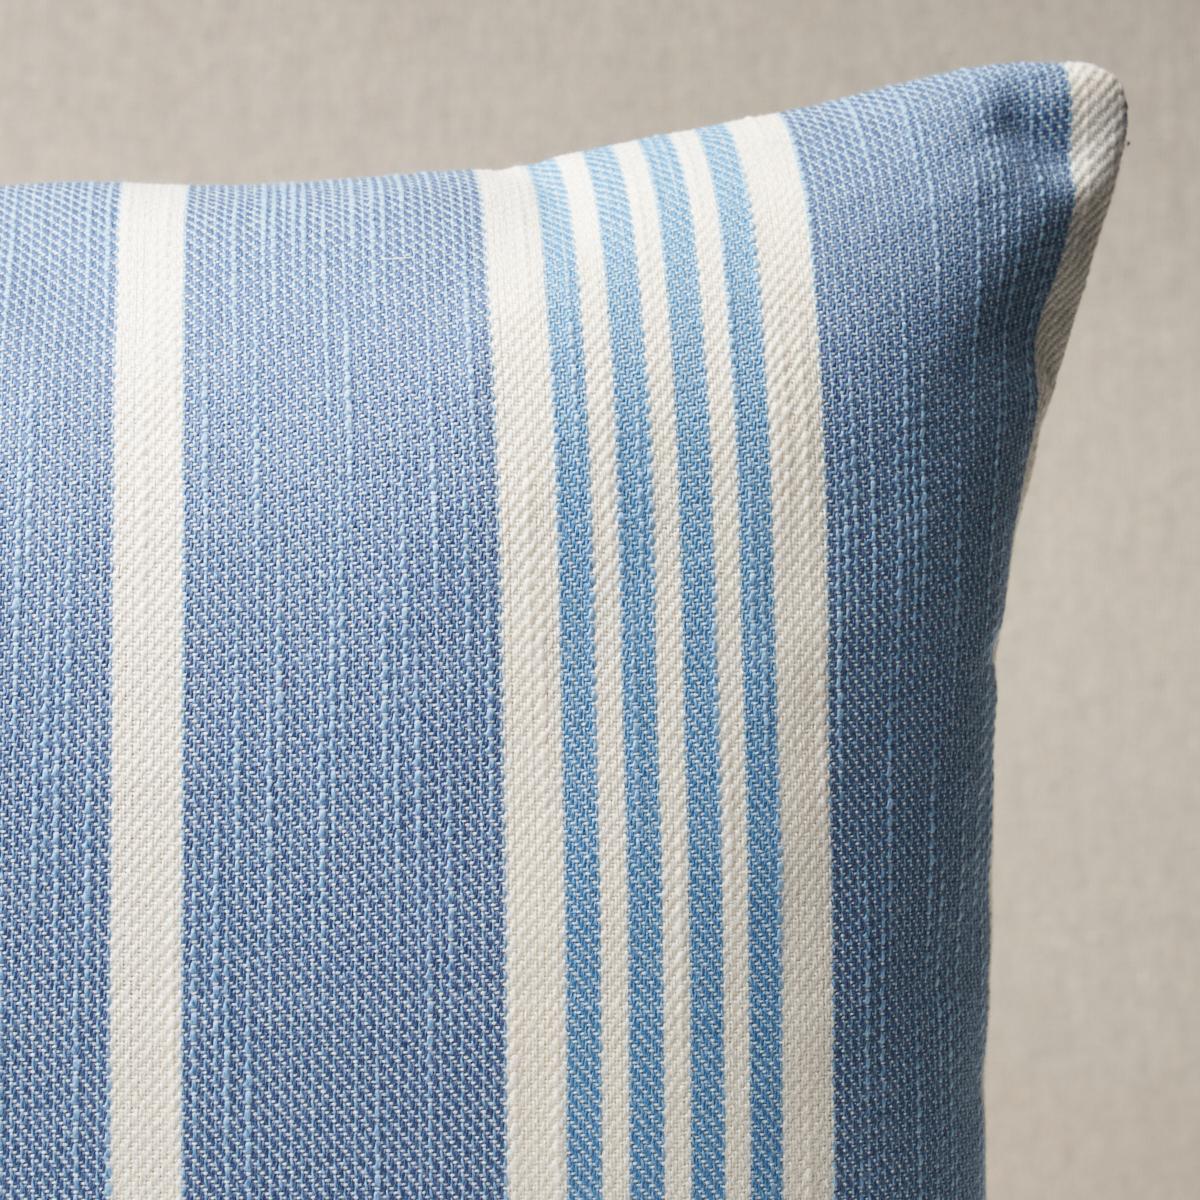 This pillow features Hampton Stripe Indoor/Outdoor by Mary McDonald for Schumacher with a knife edge finish. Smart and sturdy, Hampton Stripe Indoor/Outdoor in pool is a wonderfully versatile fabric design by Mary McDonald. The slubby